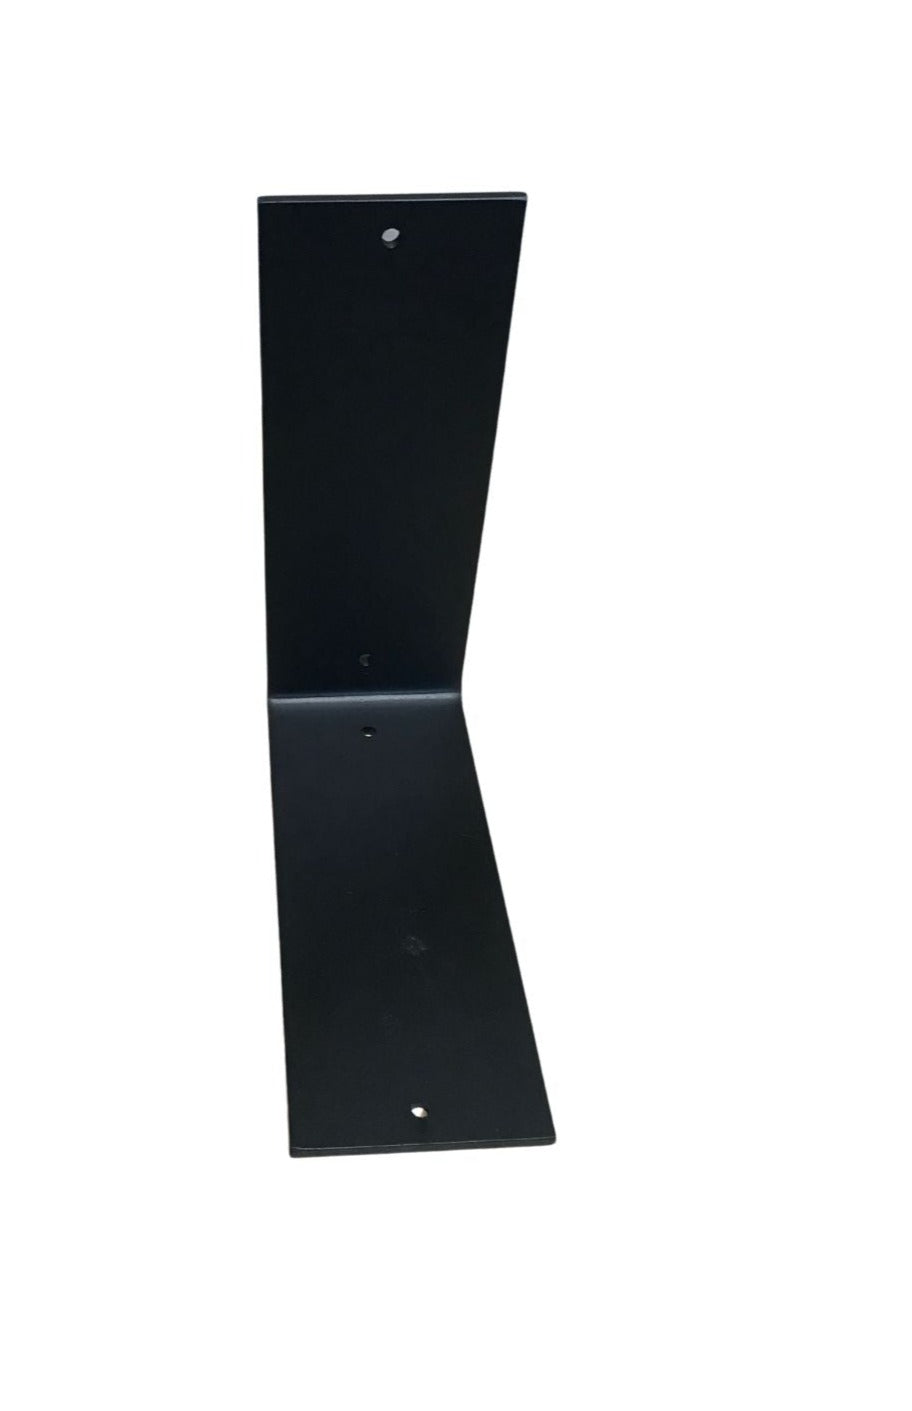 A 4-inch wide L bracket made of sturdy metal. The bracket has a right-angle shape with pre-drilled holes along both arms for easy mounting. It features a smooth finish and reinforced edges for added strength and stability, ideal for supporting shelves or other fixtures